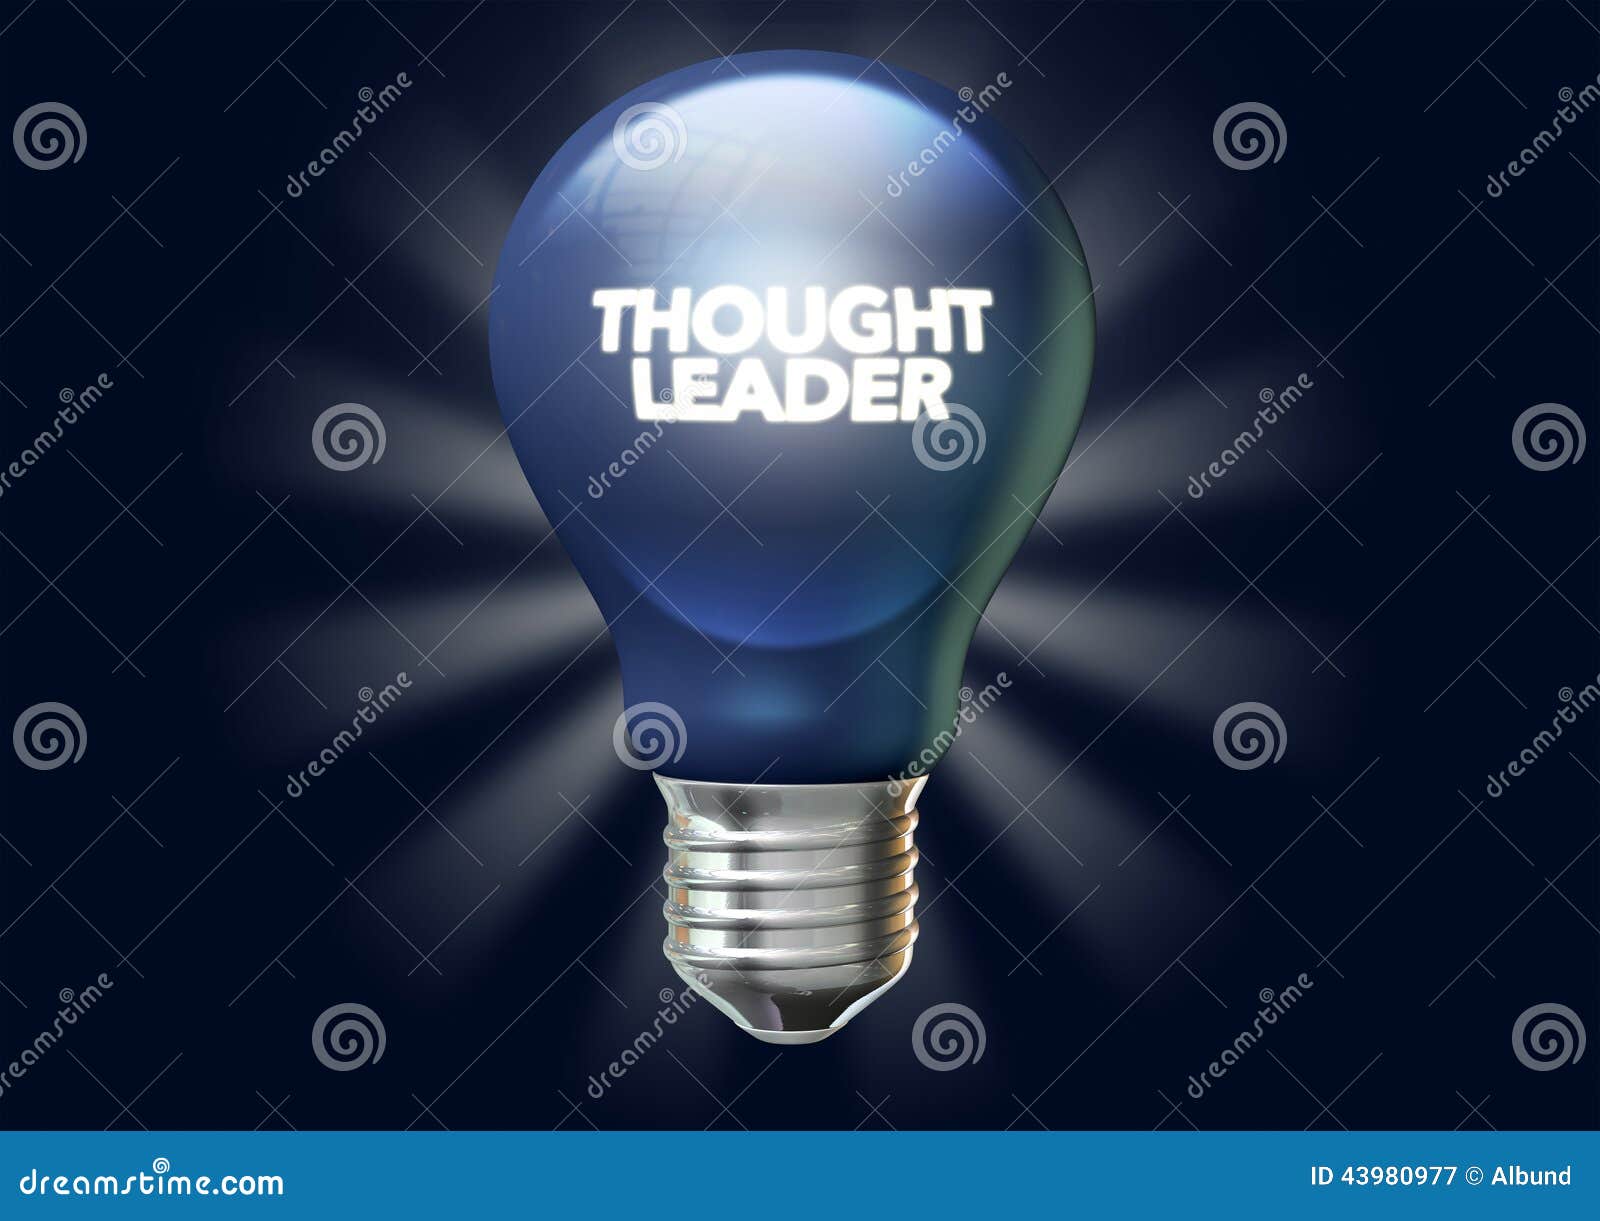 thought leader light bulb and banner